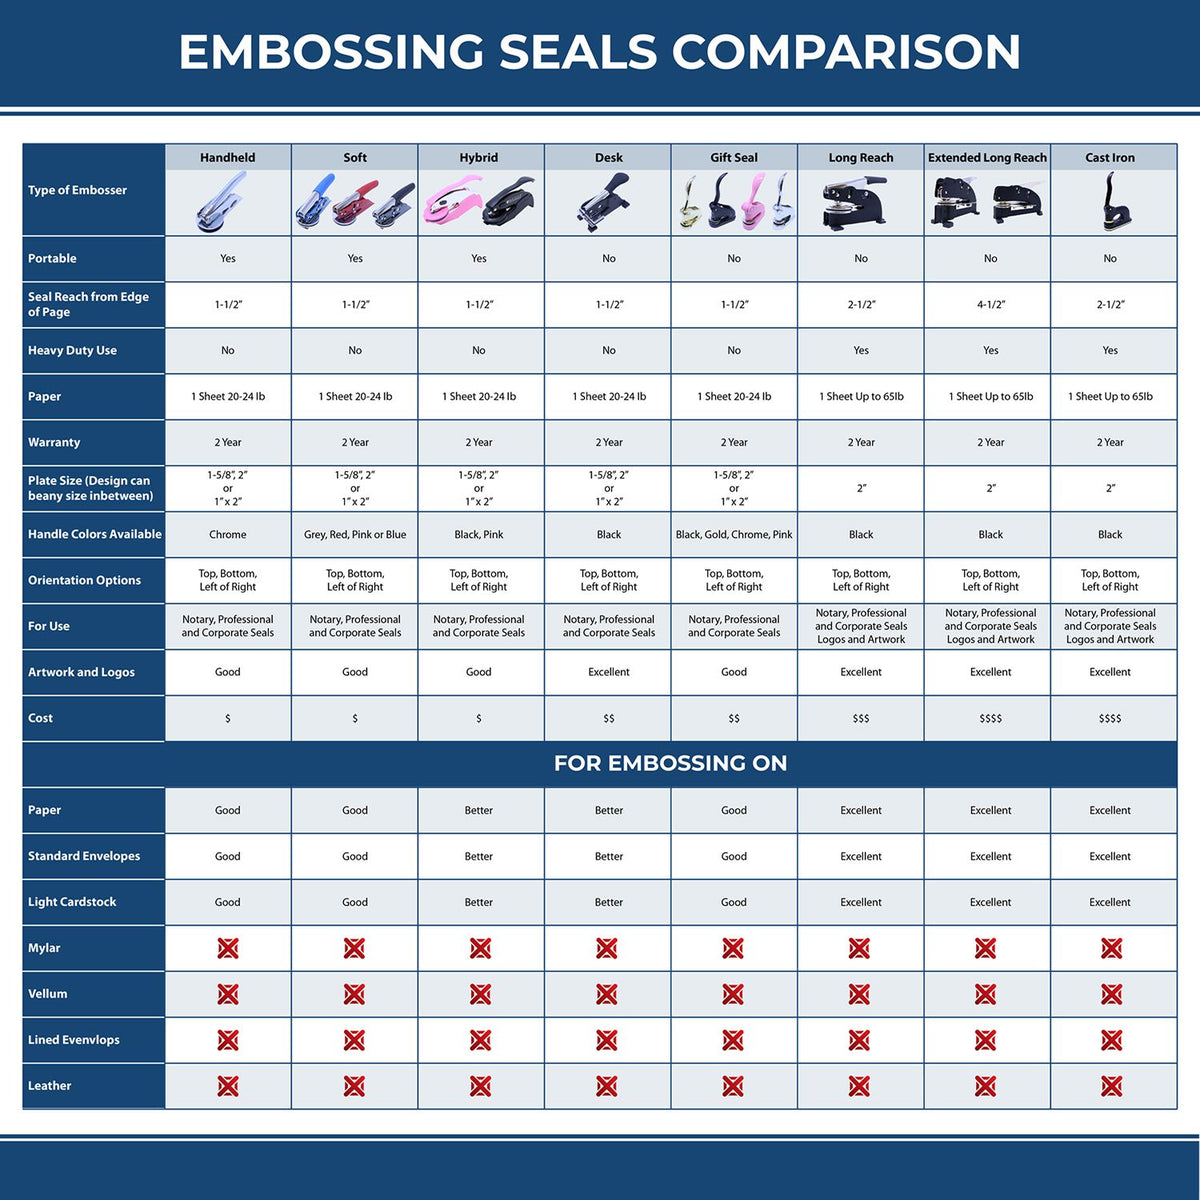 A comparison chart for the different types of mount models available for the Long Reach Mississippi Land Surveyor Seal.